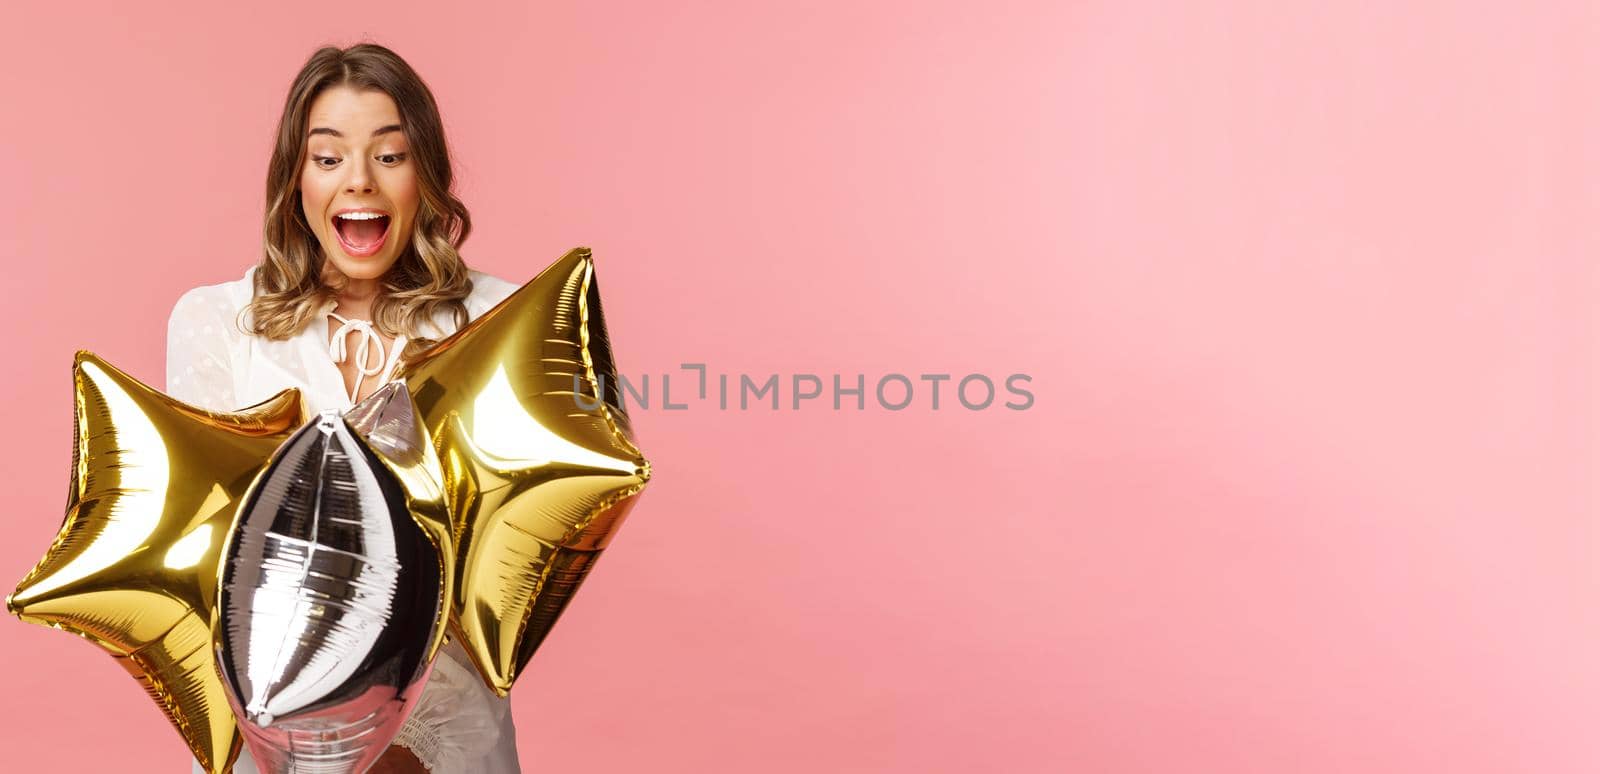 Holidays, celebration and women concept. Portrait of happy lovely young woman in white dress, gasping from amazement and joy, holding birthday star-shaped balloons, pink background.